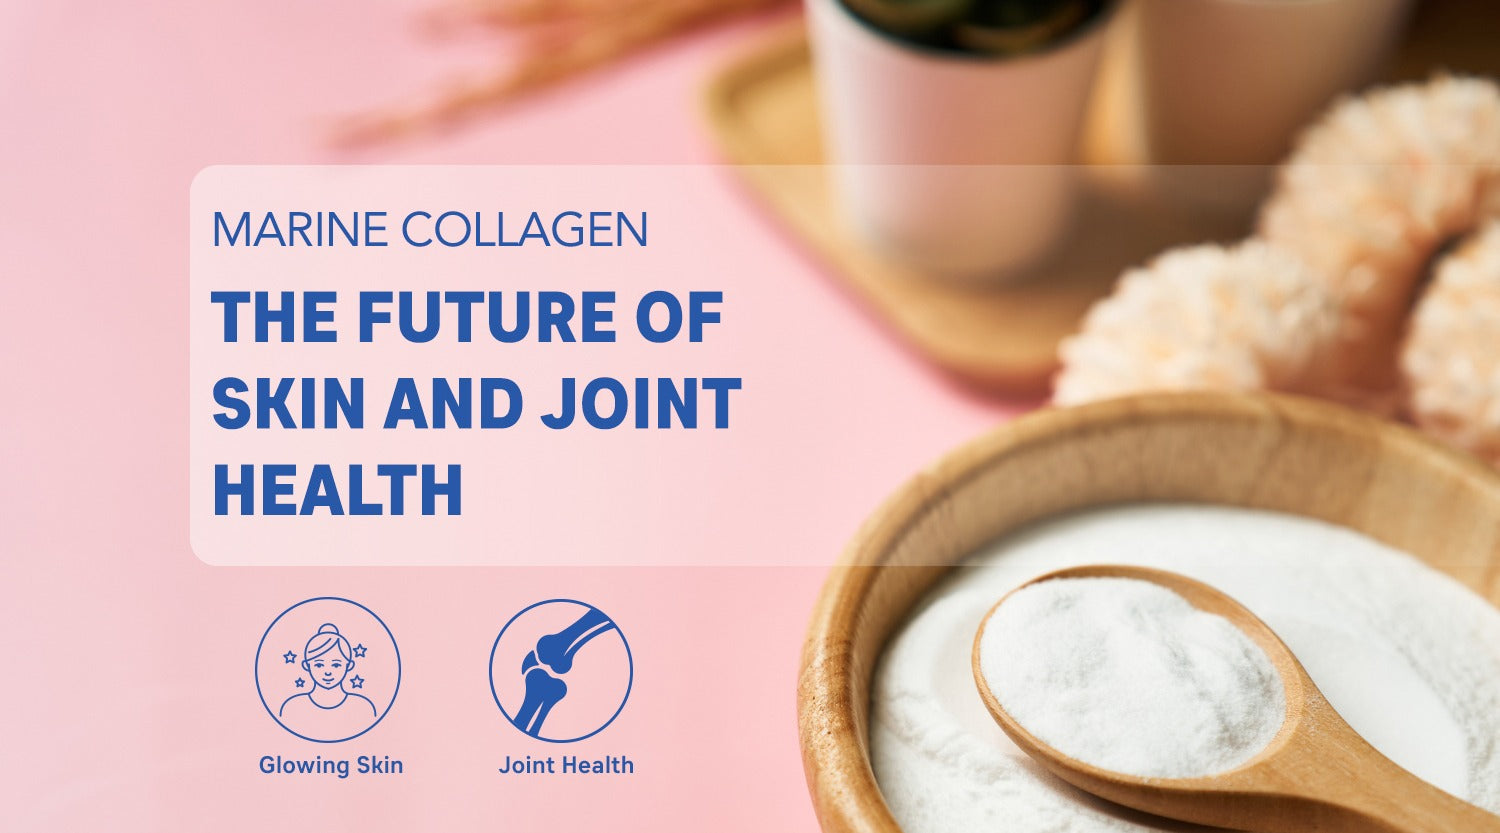 Marine Collagen: The Future of Skin and Joint Health